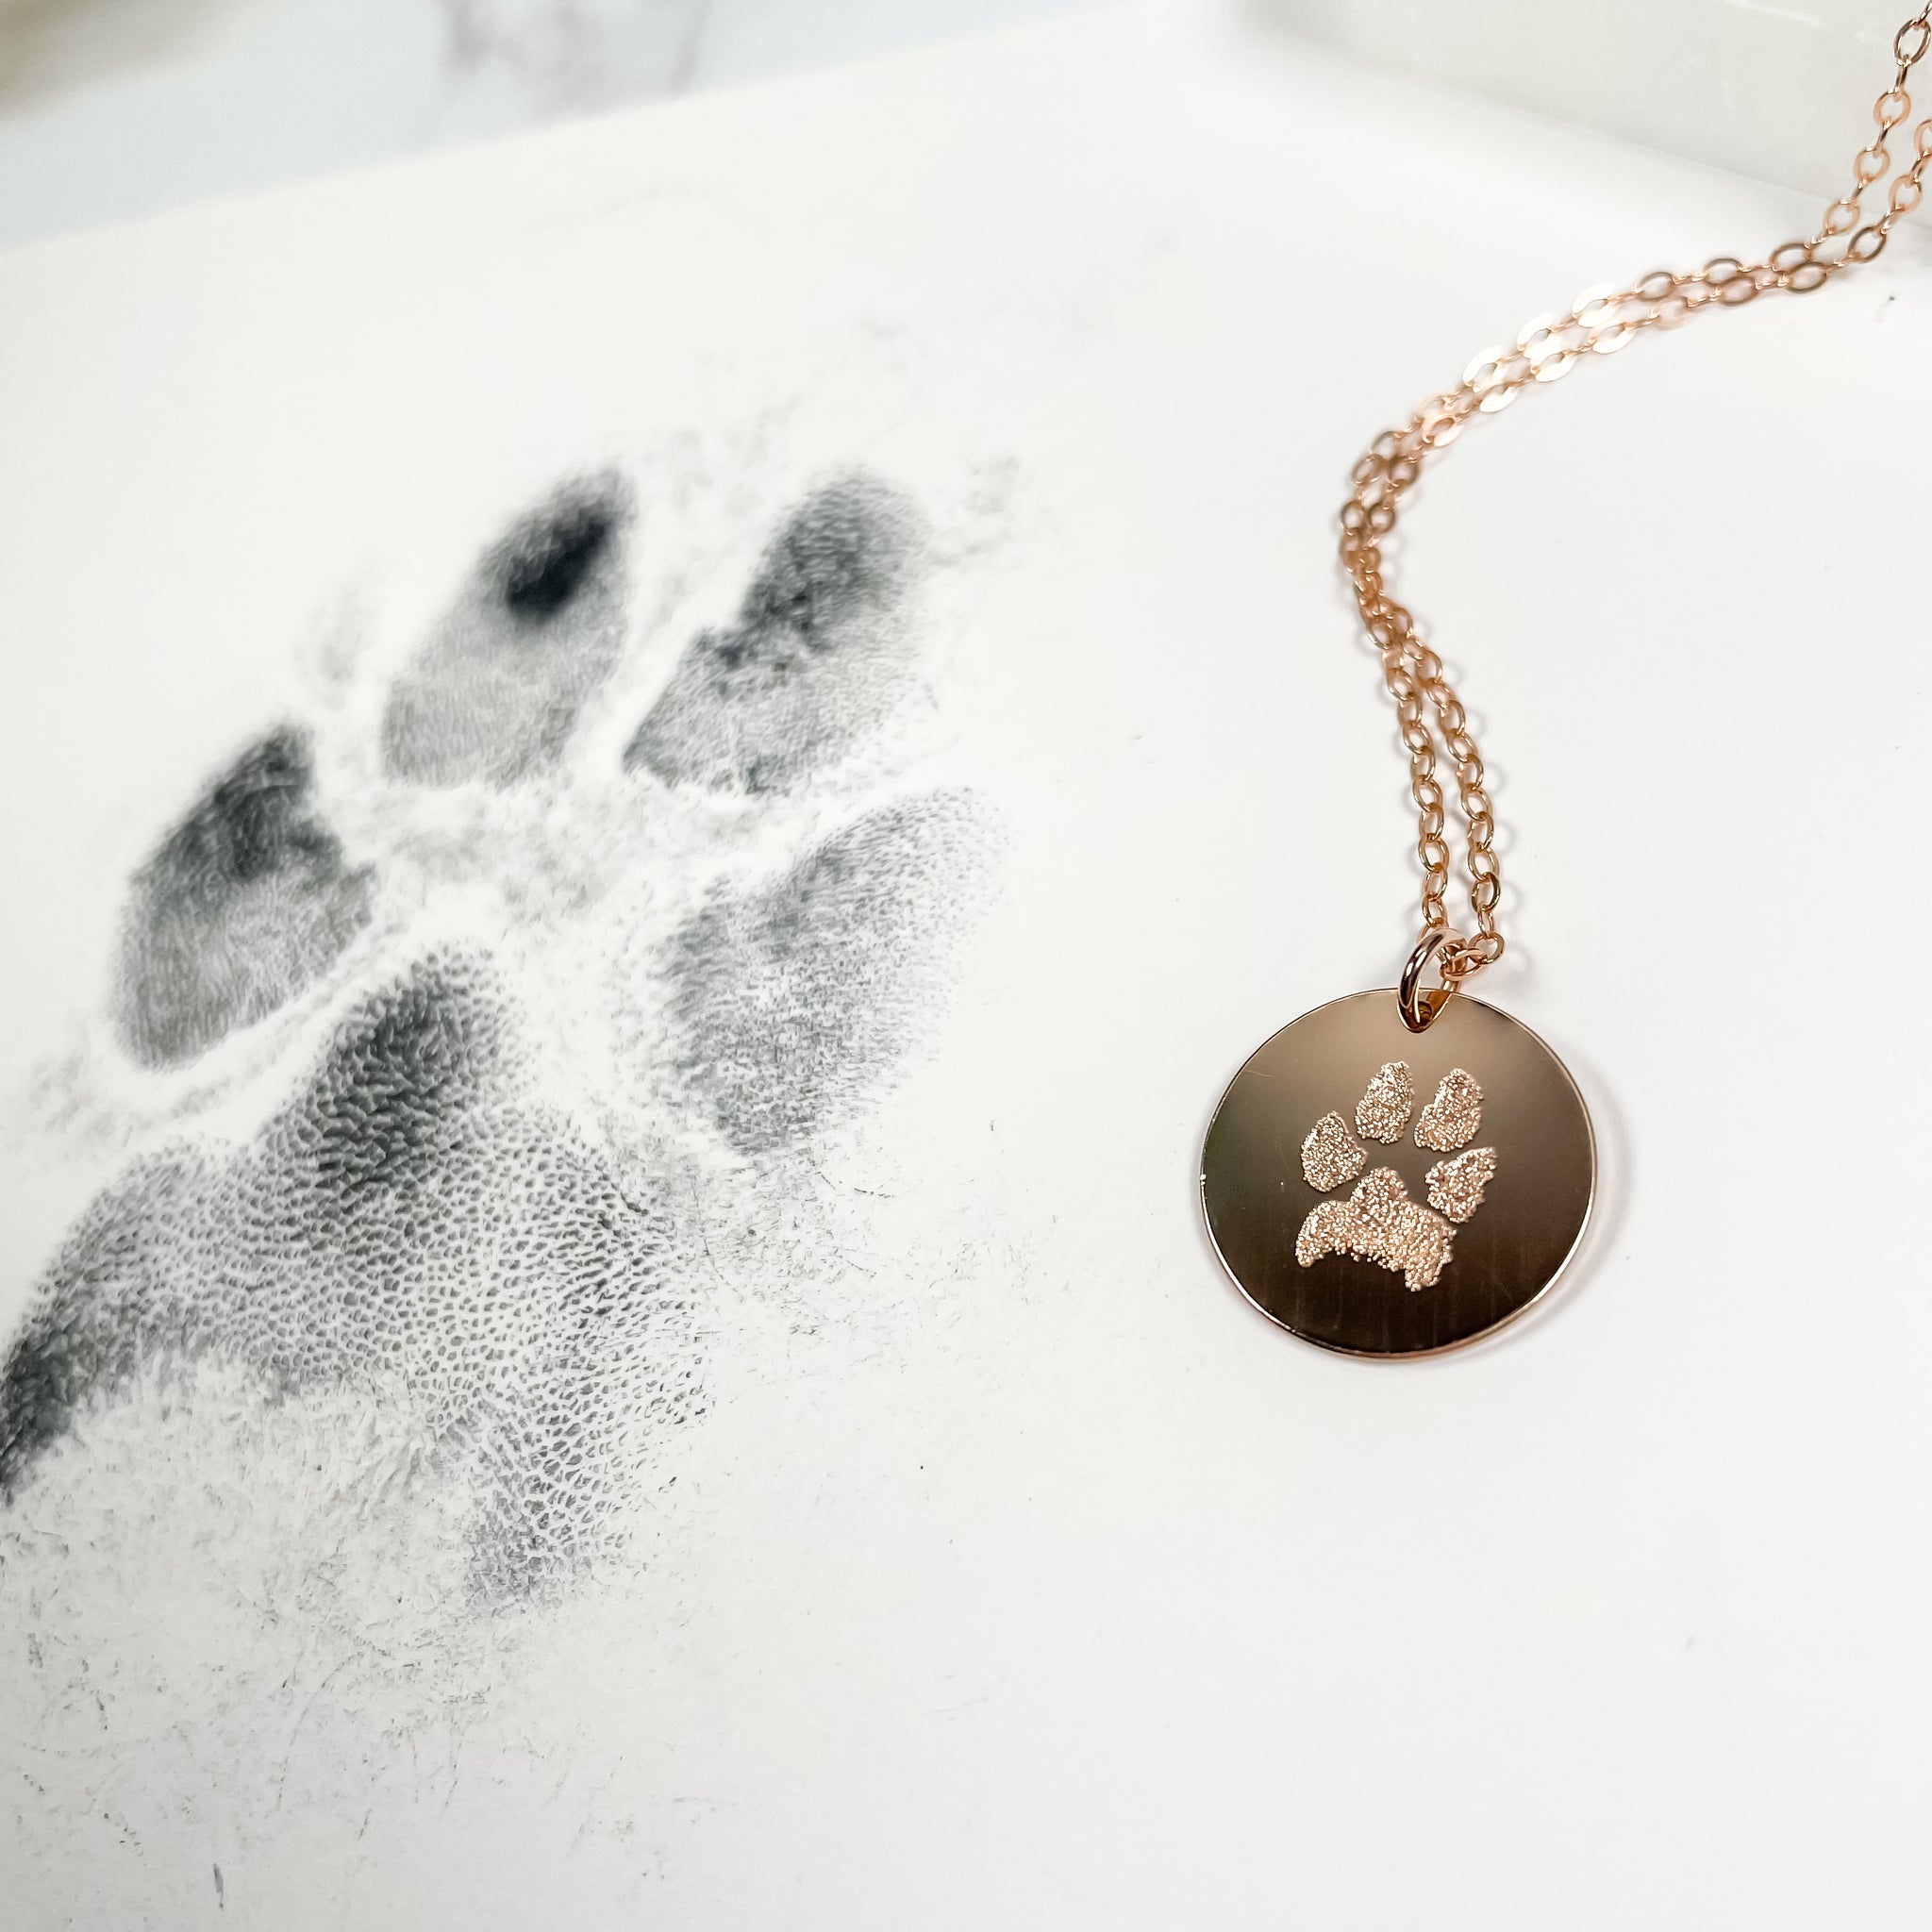 Paw Print Necklace Your Actual Pet Paw Print Necklace Custom Pet Necklace  Dog Paw Necklace Cat Paw Necklace Personalized Dog Paw - Etsy | Paw print  necklace, Dog paw necklaces, Paw necklaces